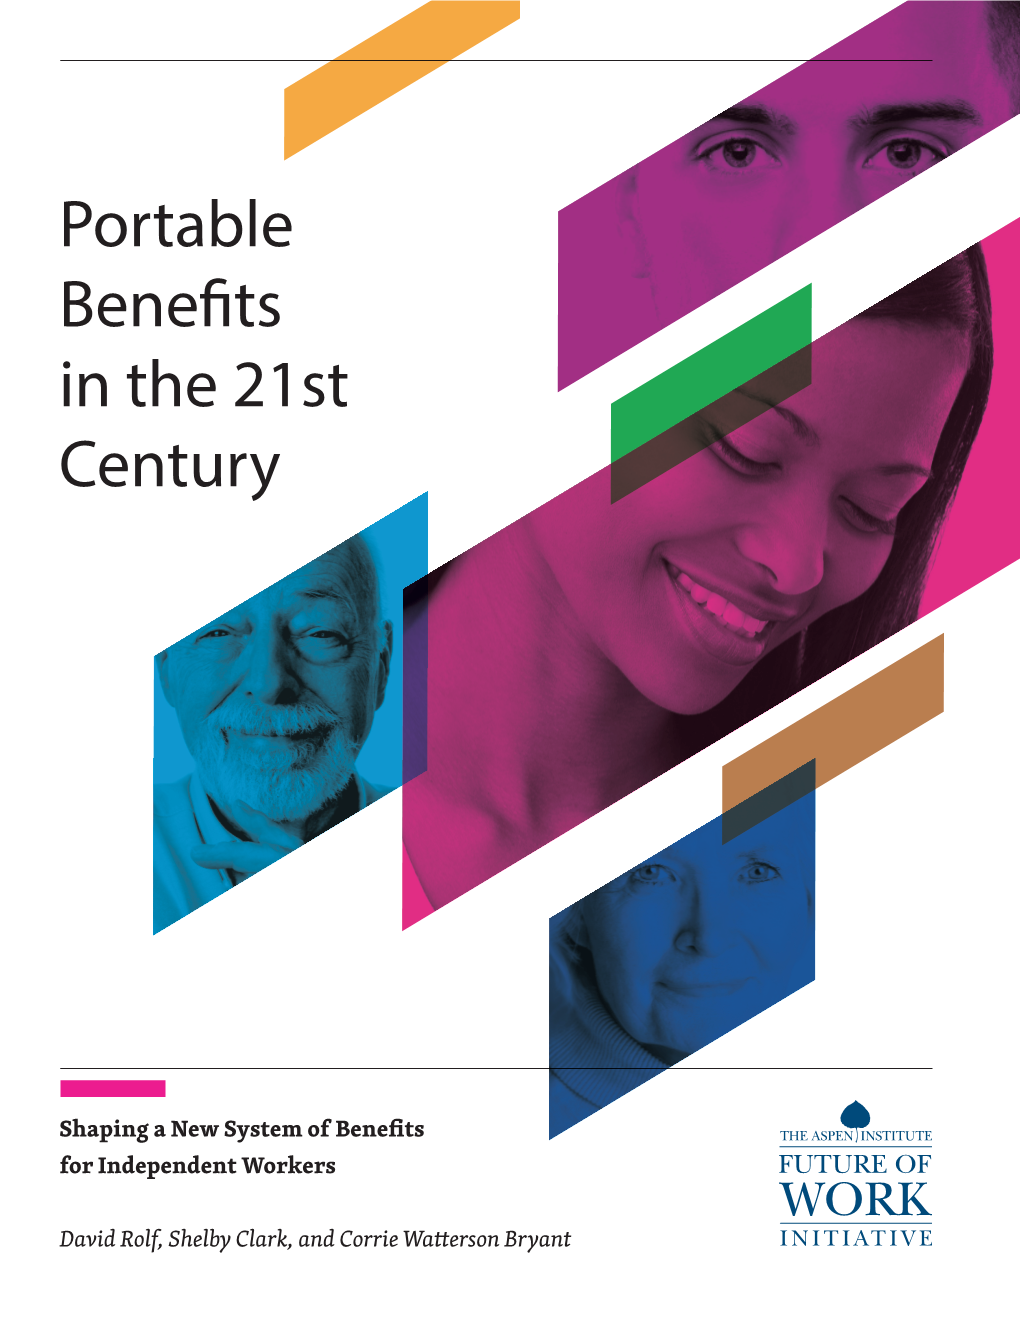 Portable Benefits in the 21St Century